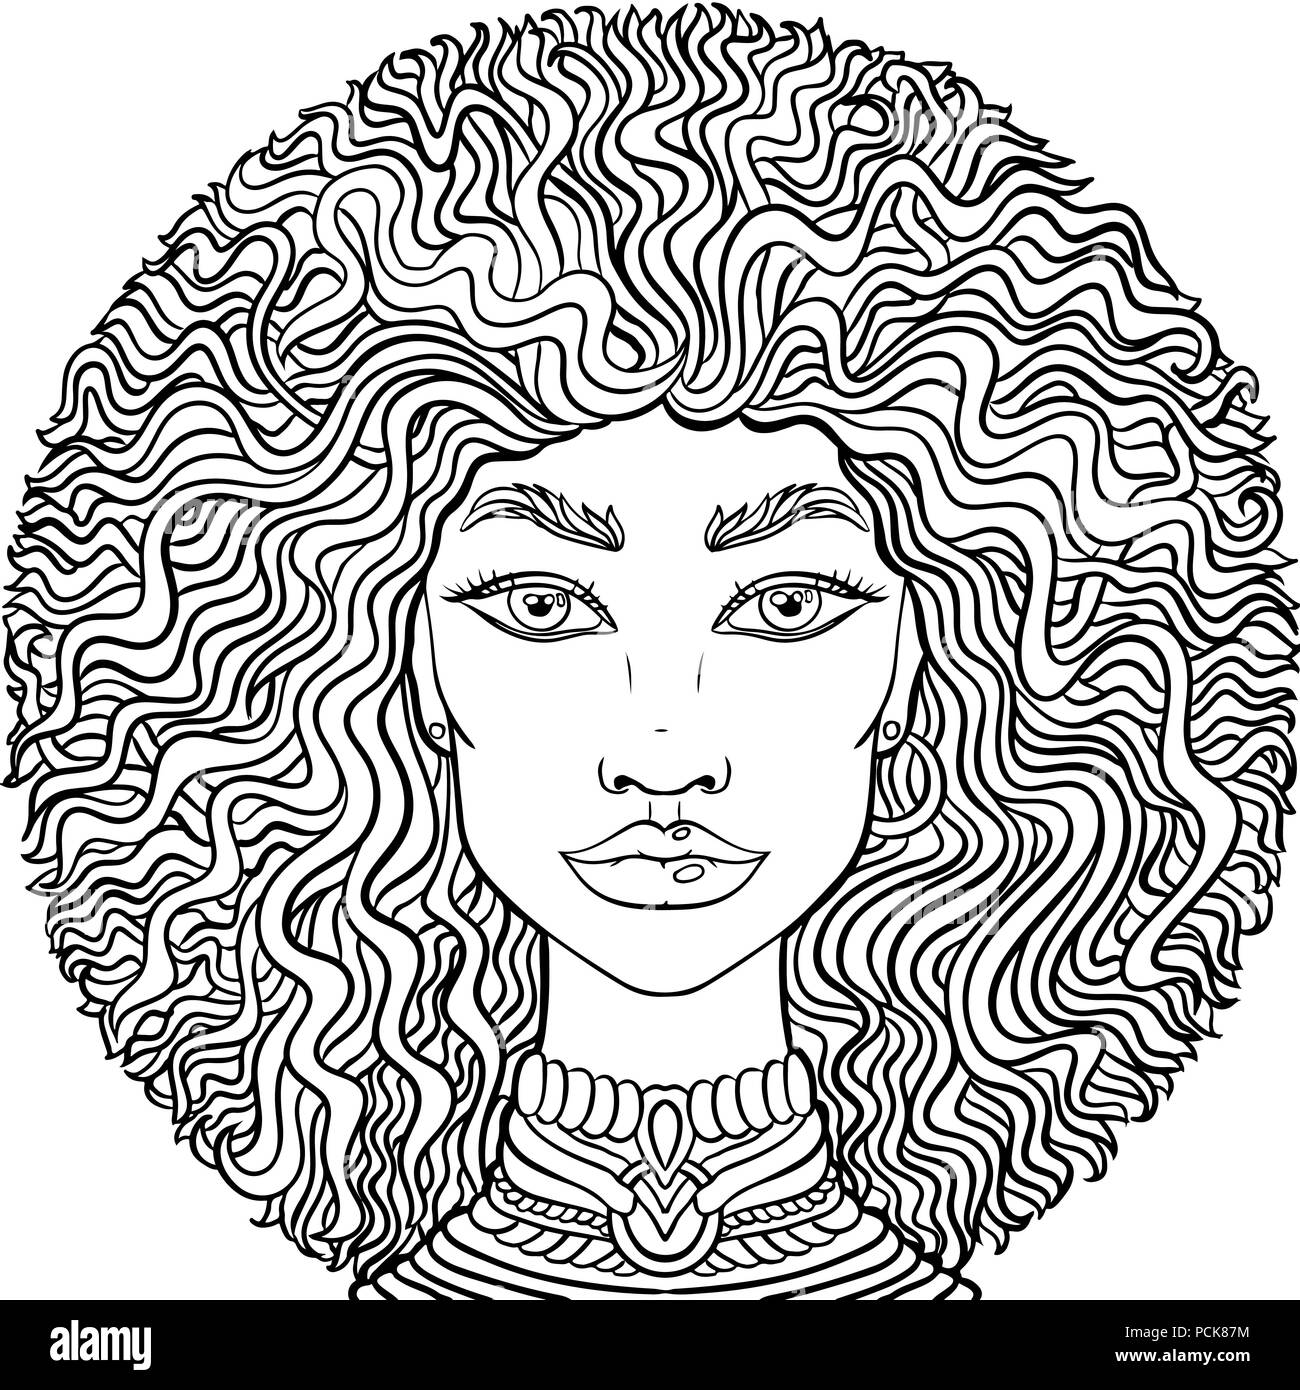 Hand drawn doodle girlss face on white background. Womens portrait for adult coloring book. Stock Vector